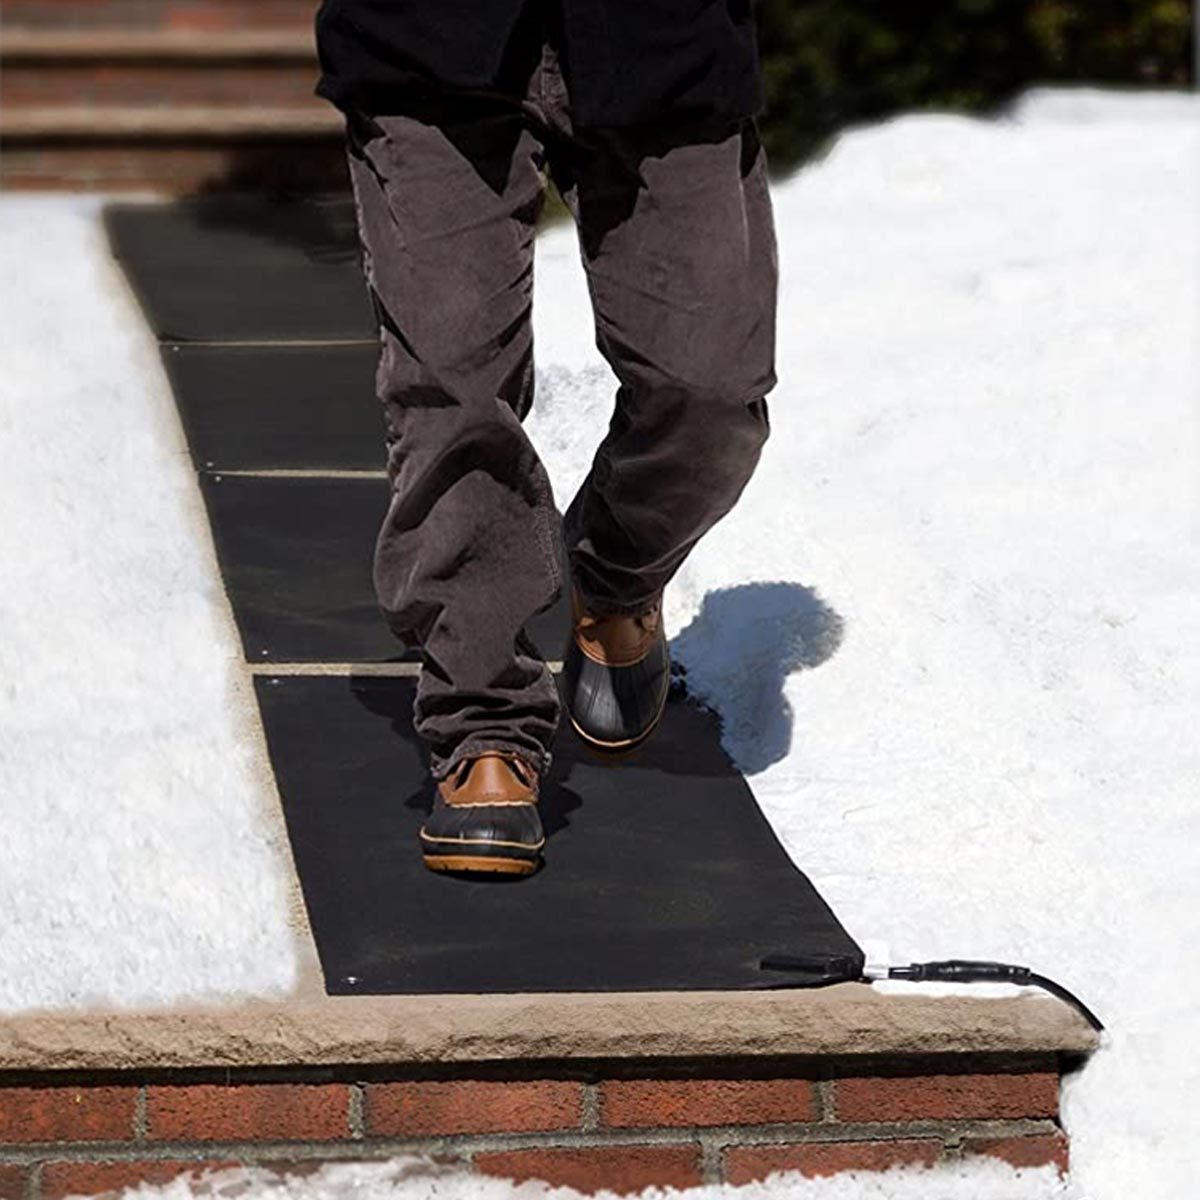 HeatTrak Heated Snow Melting Mats for Stairs - Heated Outdoor Mats - Electric Snow Melting Mats for Winter Snow Removal - Trusted Snow and Ice